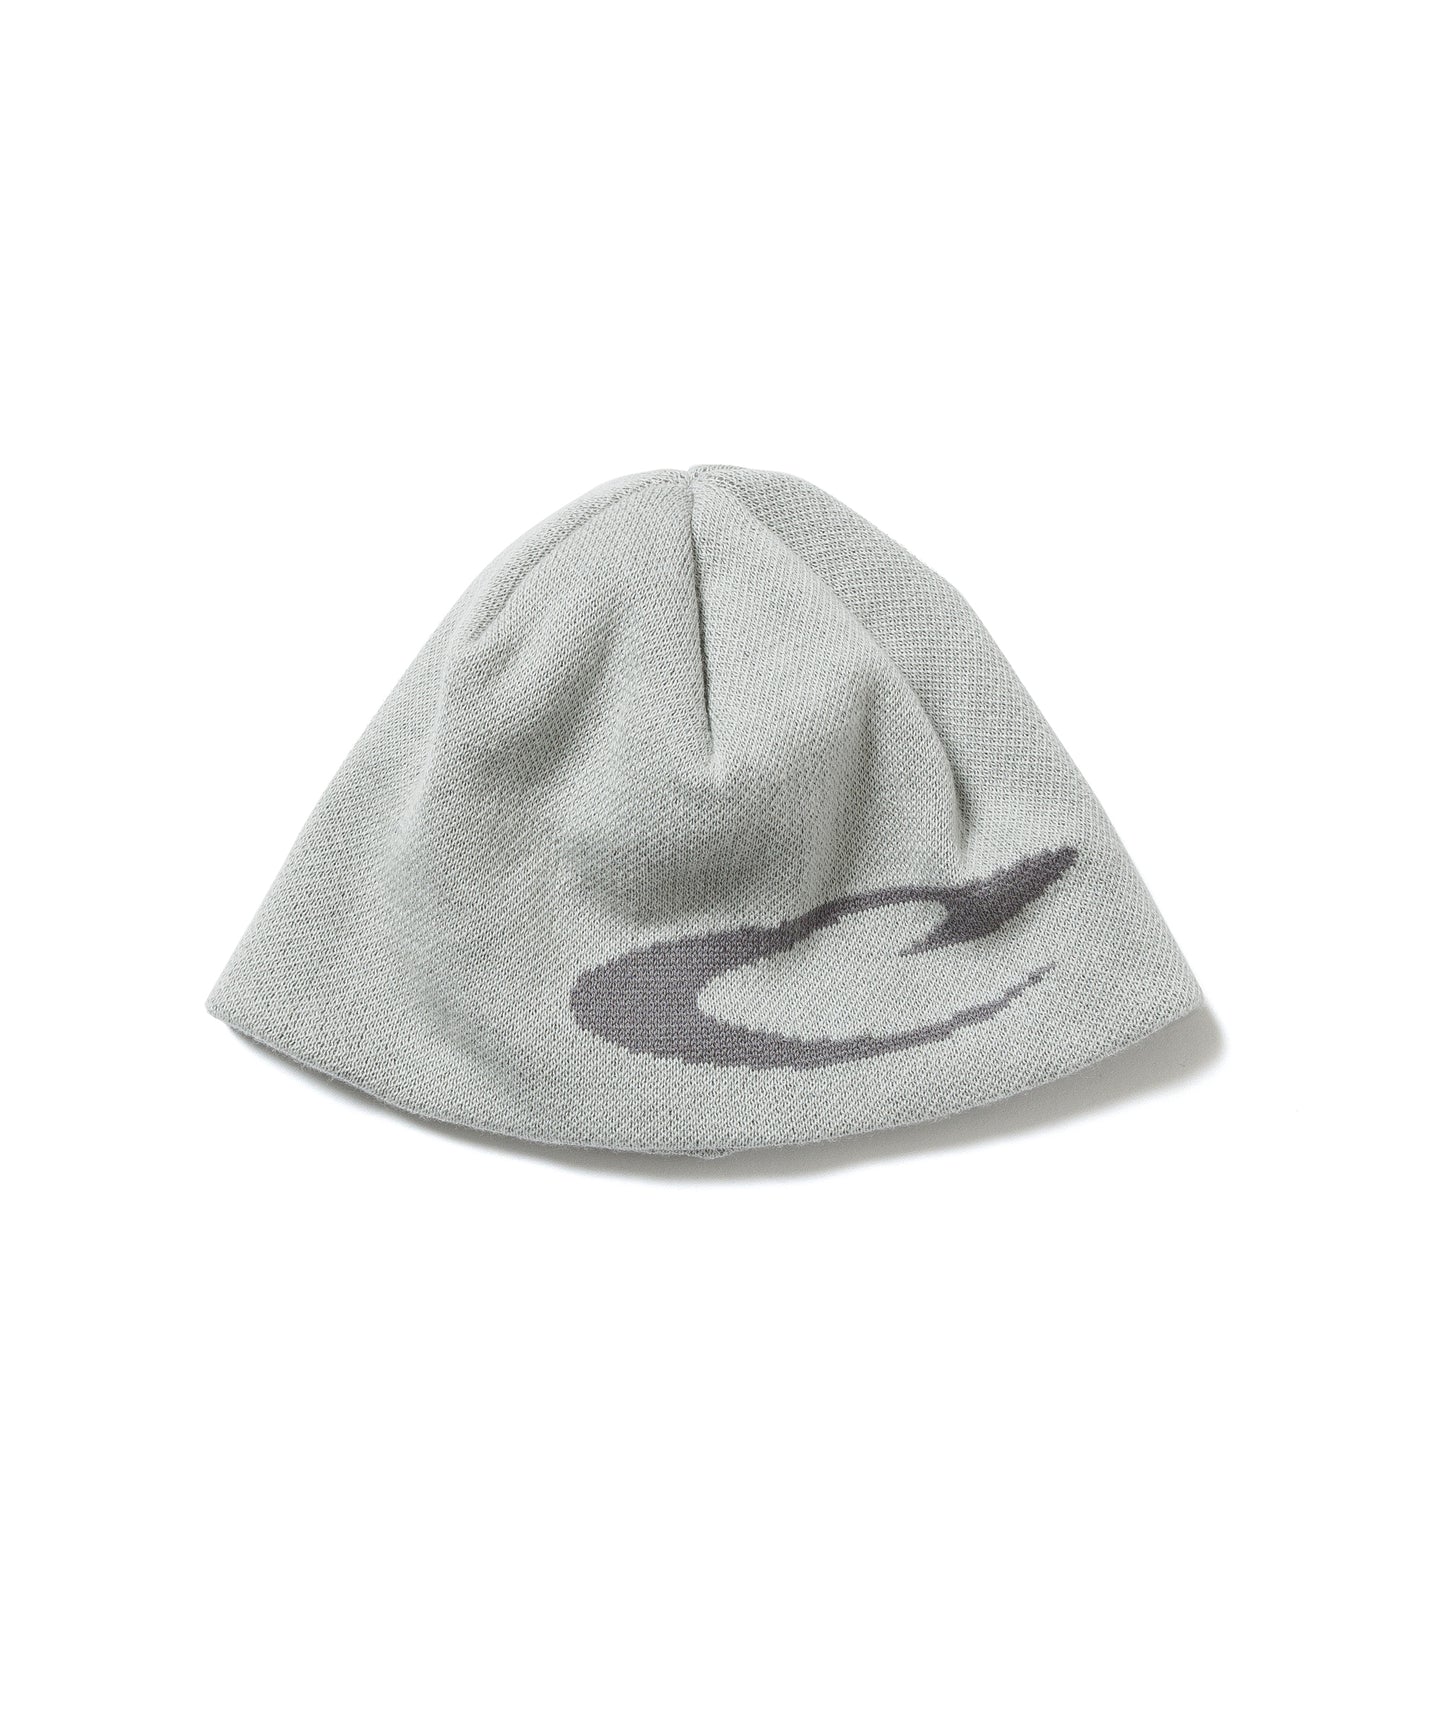 CPG EMBROIDERY KNIT CAP